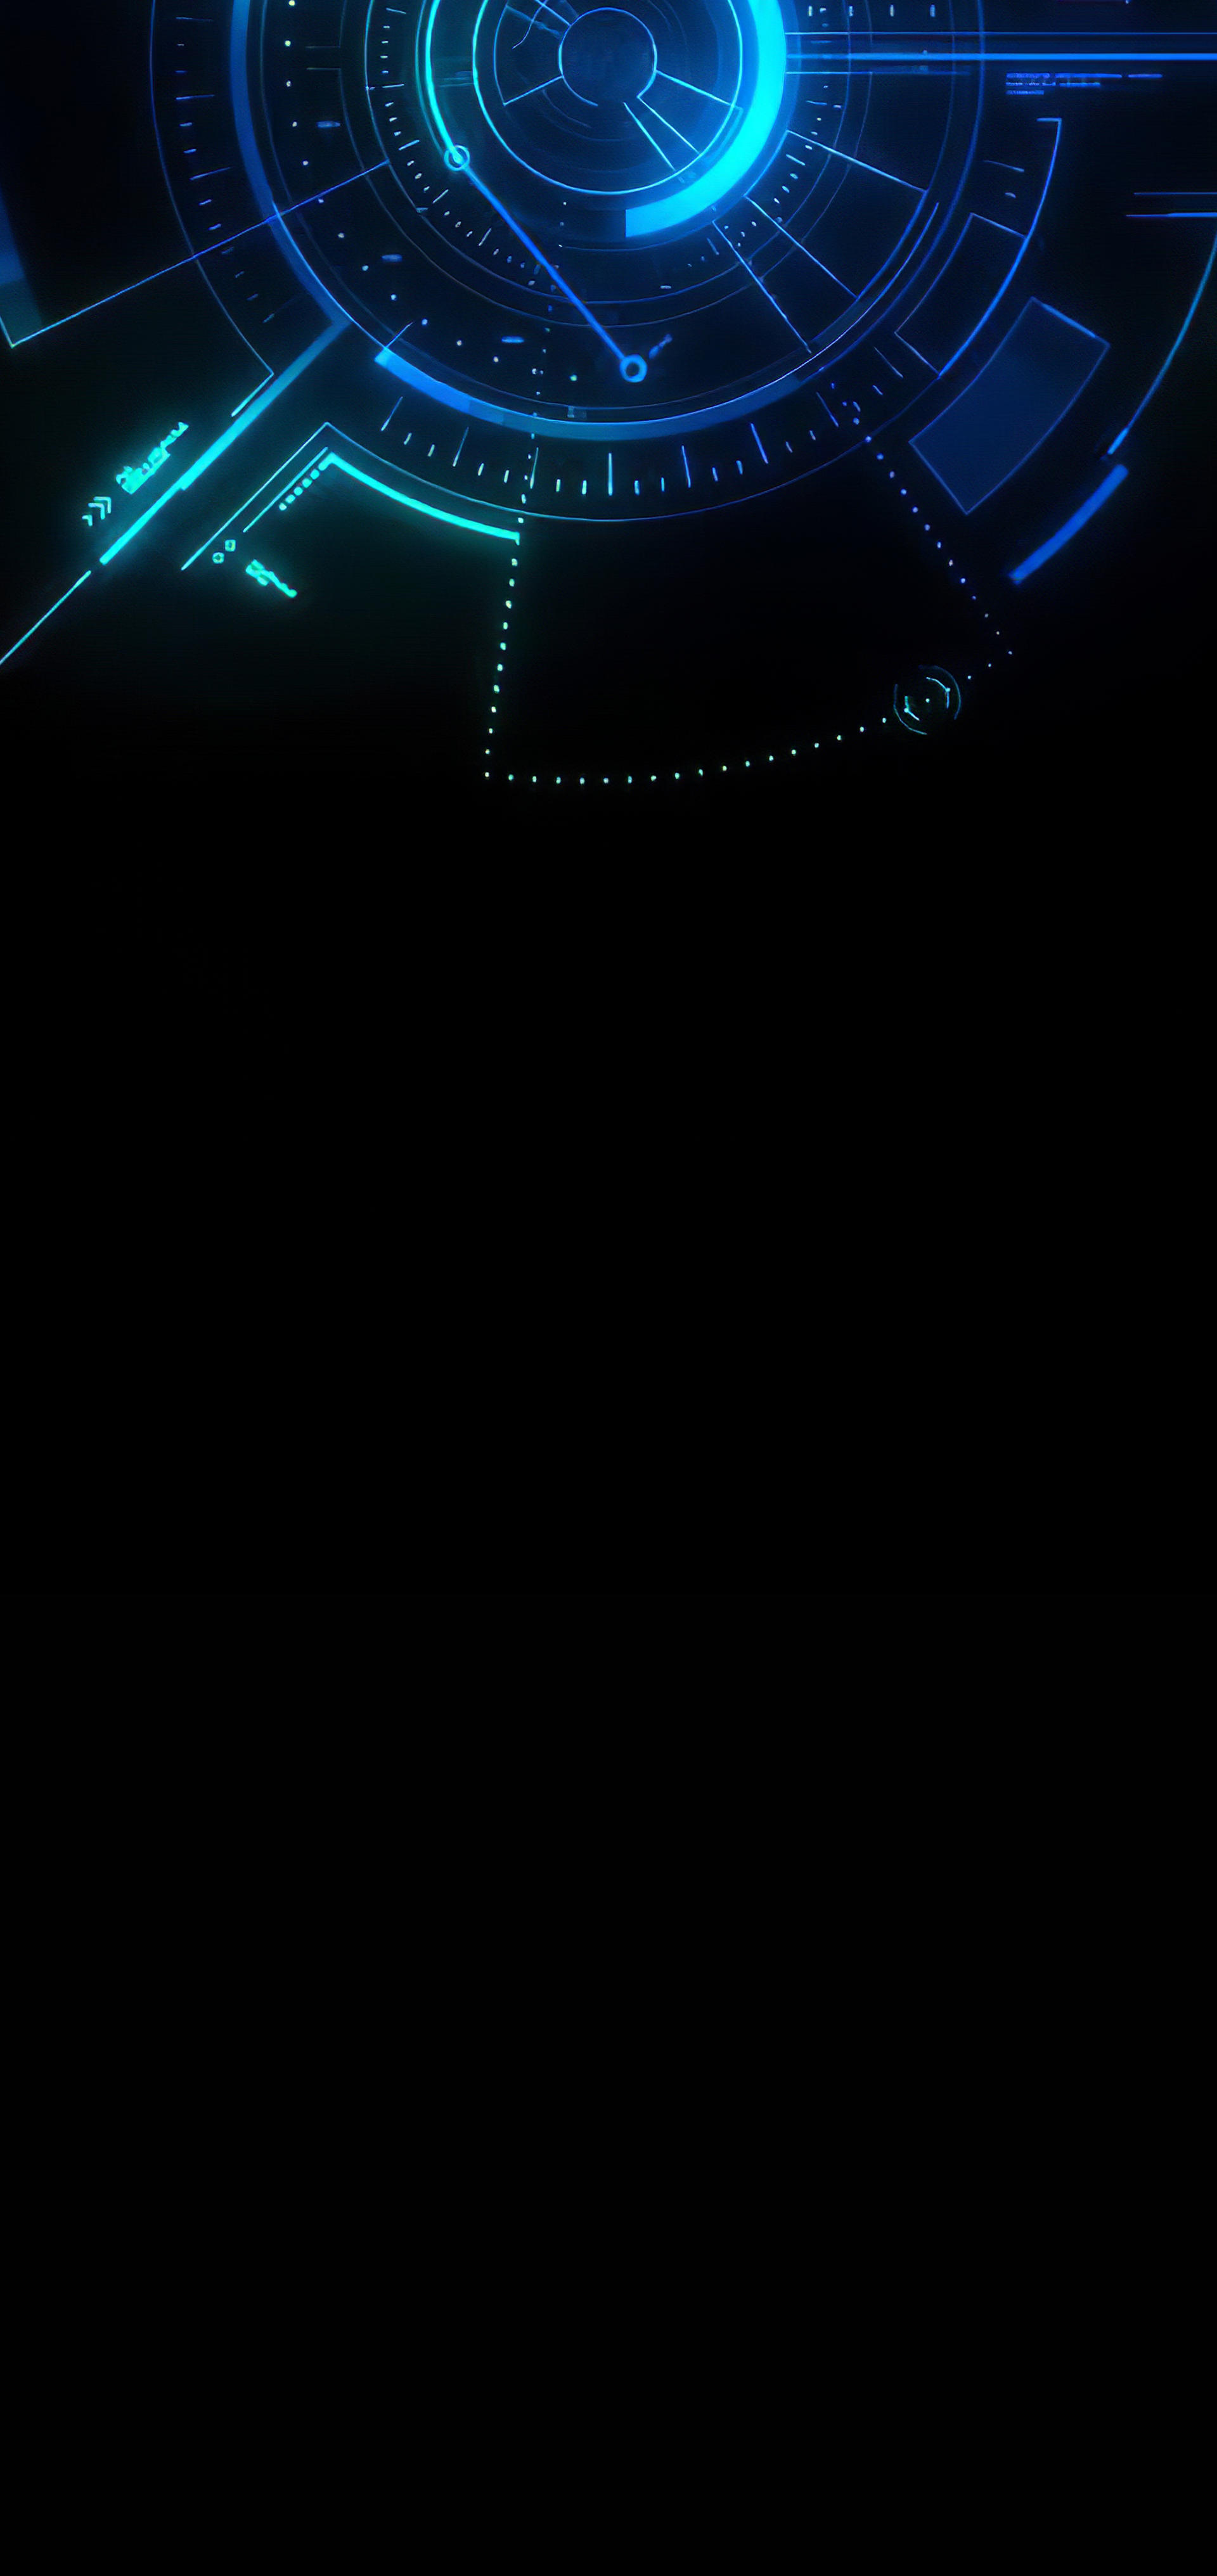 4K Teched Out Note 10 Plus Wallpaper by maniacboy777 on DeviantArt